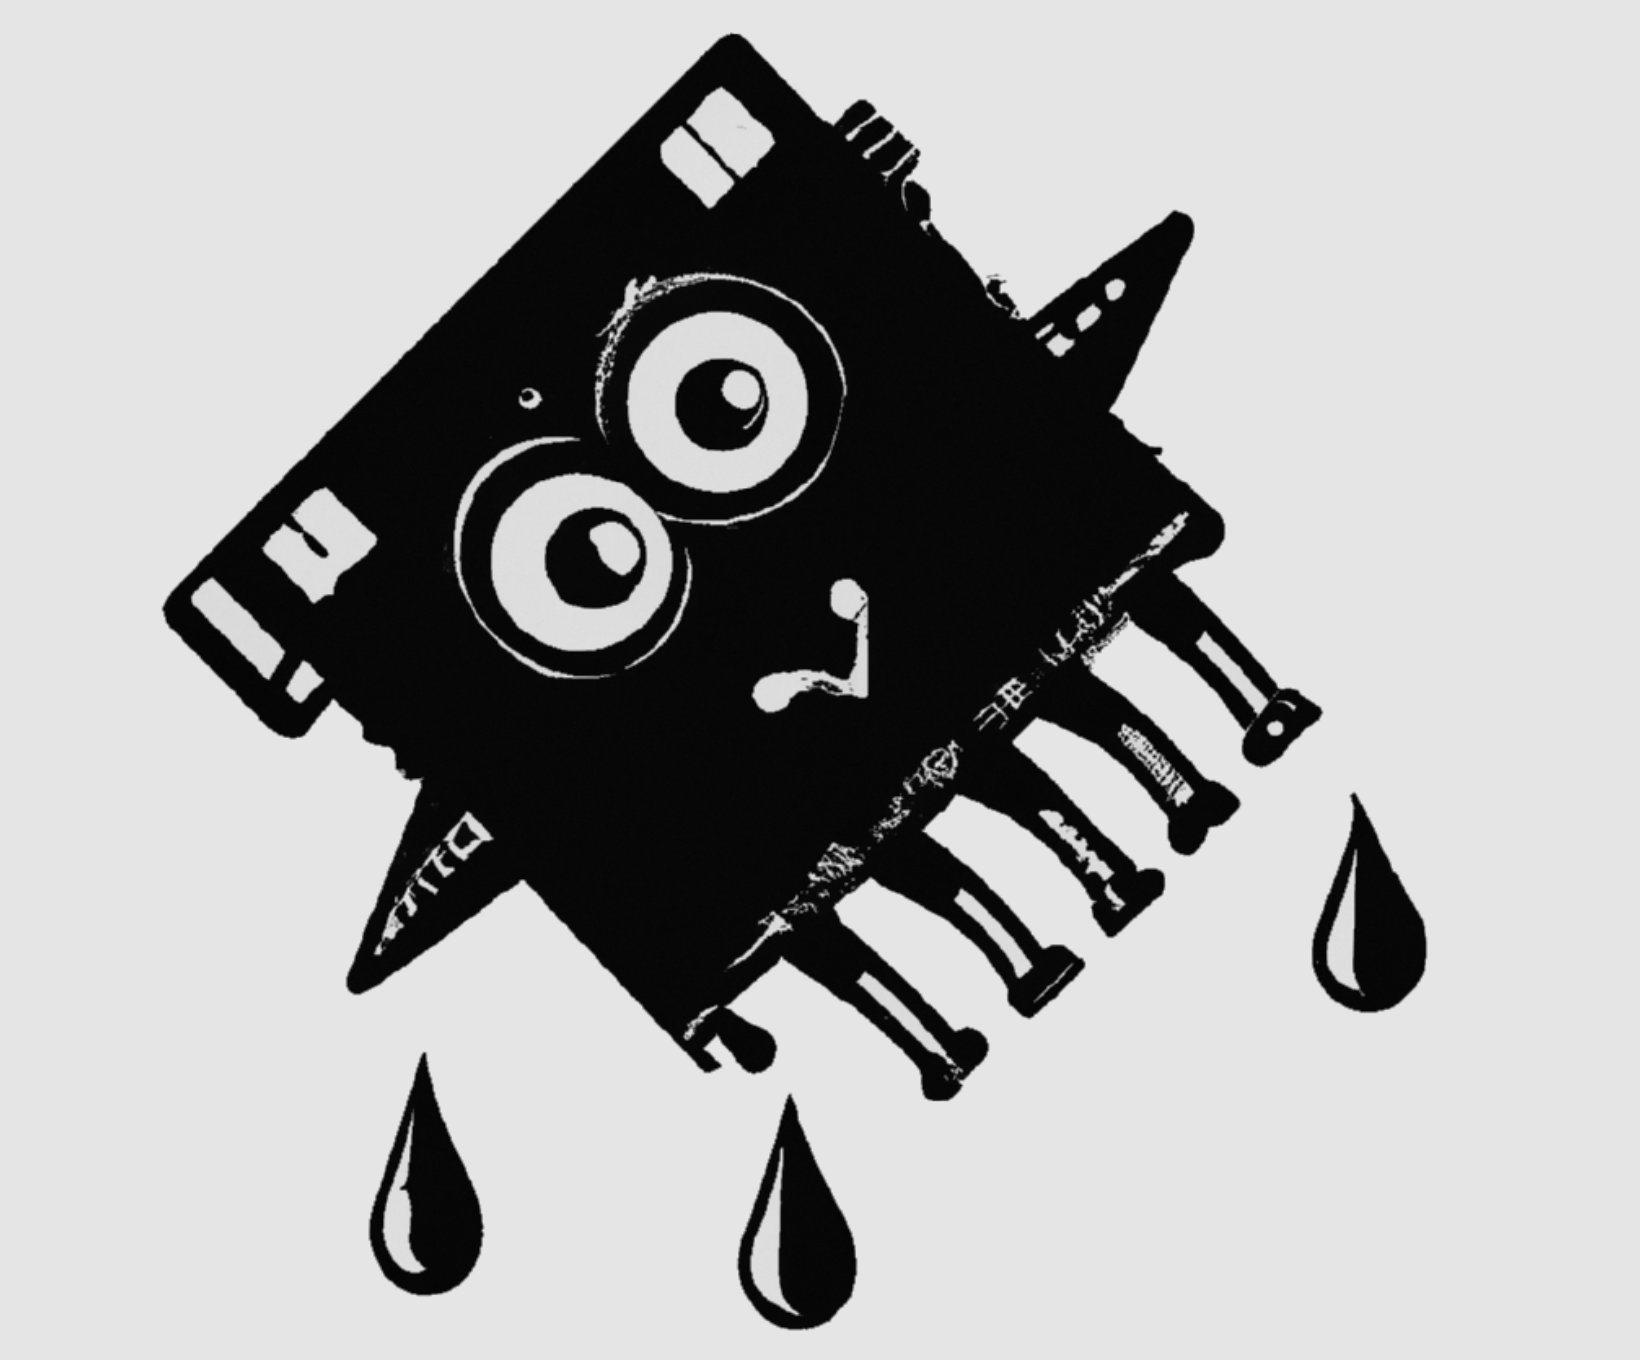 A DALL-E 2-generated logo for the "Downfall" CPU vulnerability. 